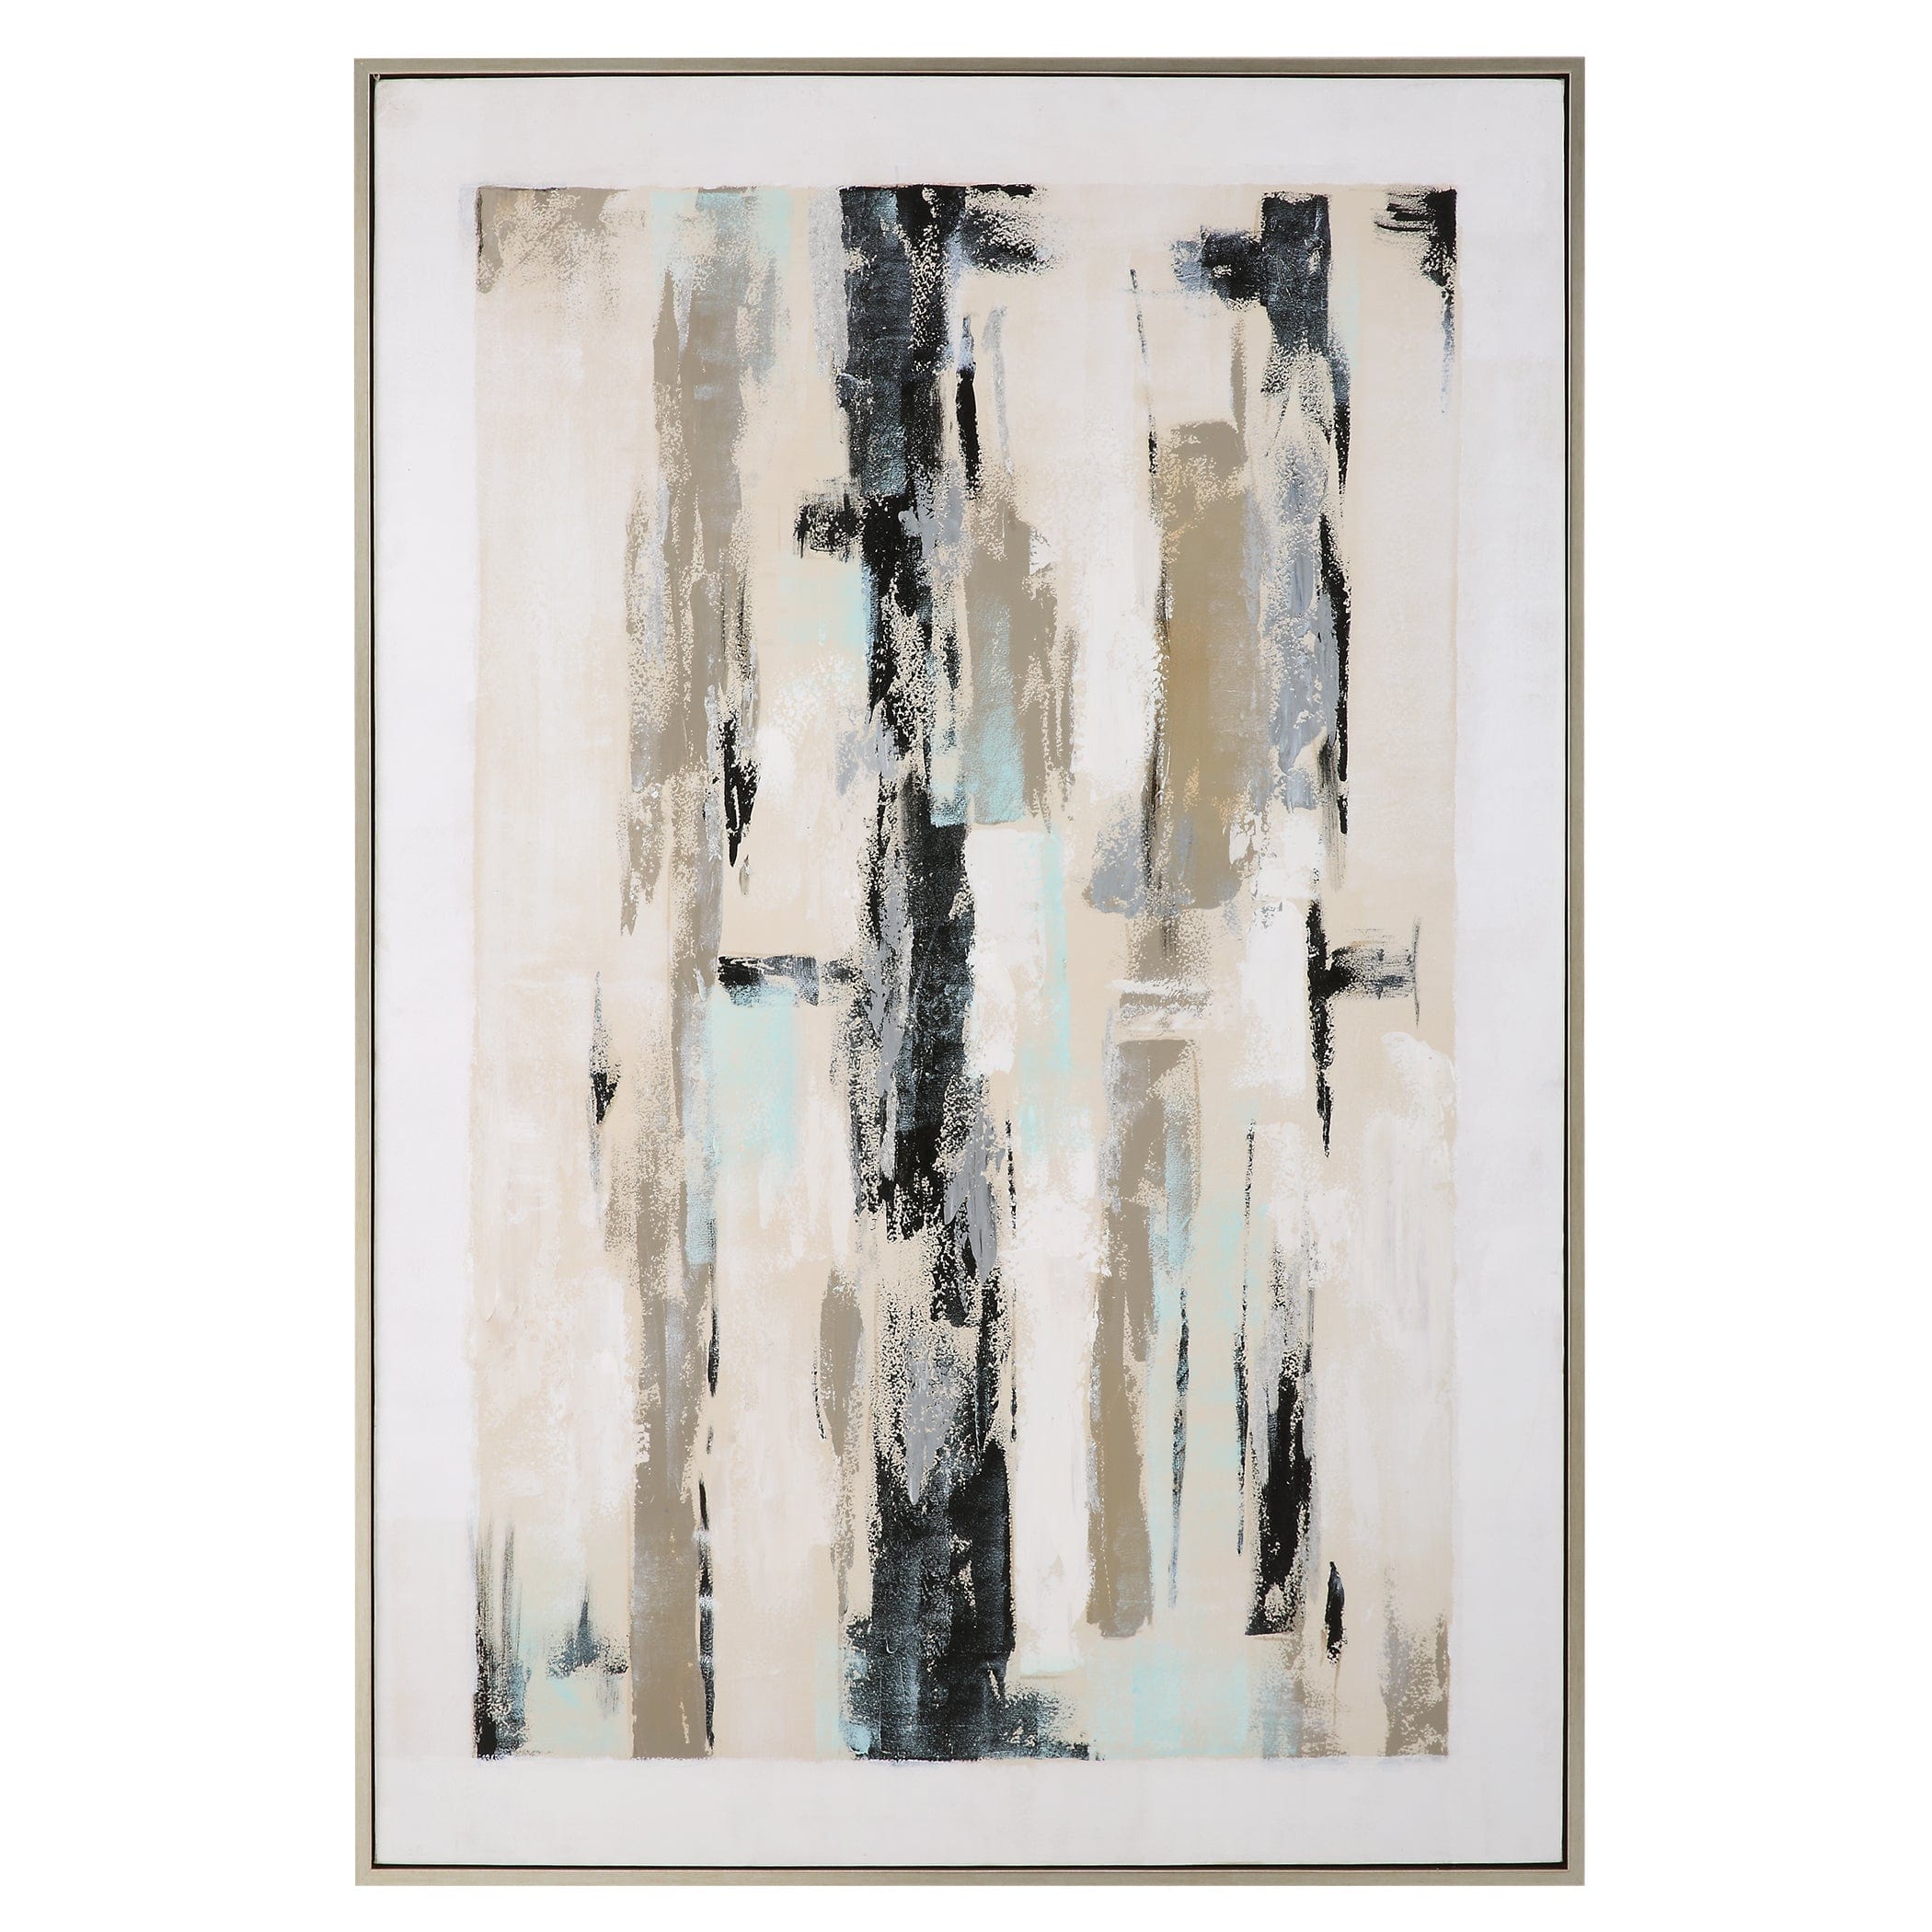 Placidity Hand Painted Abstract Art Uttermost